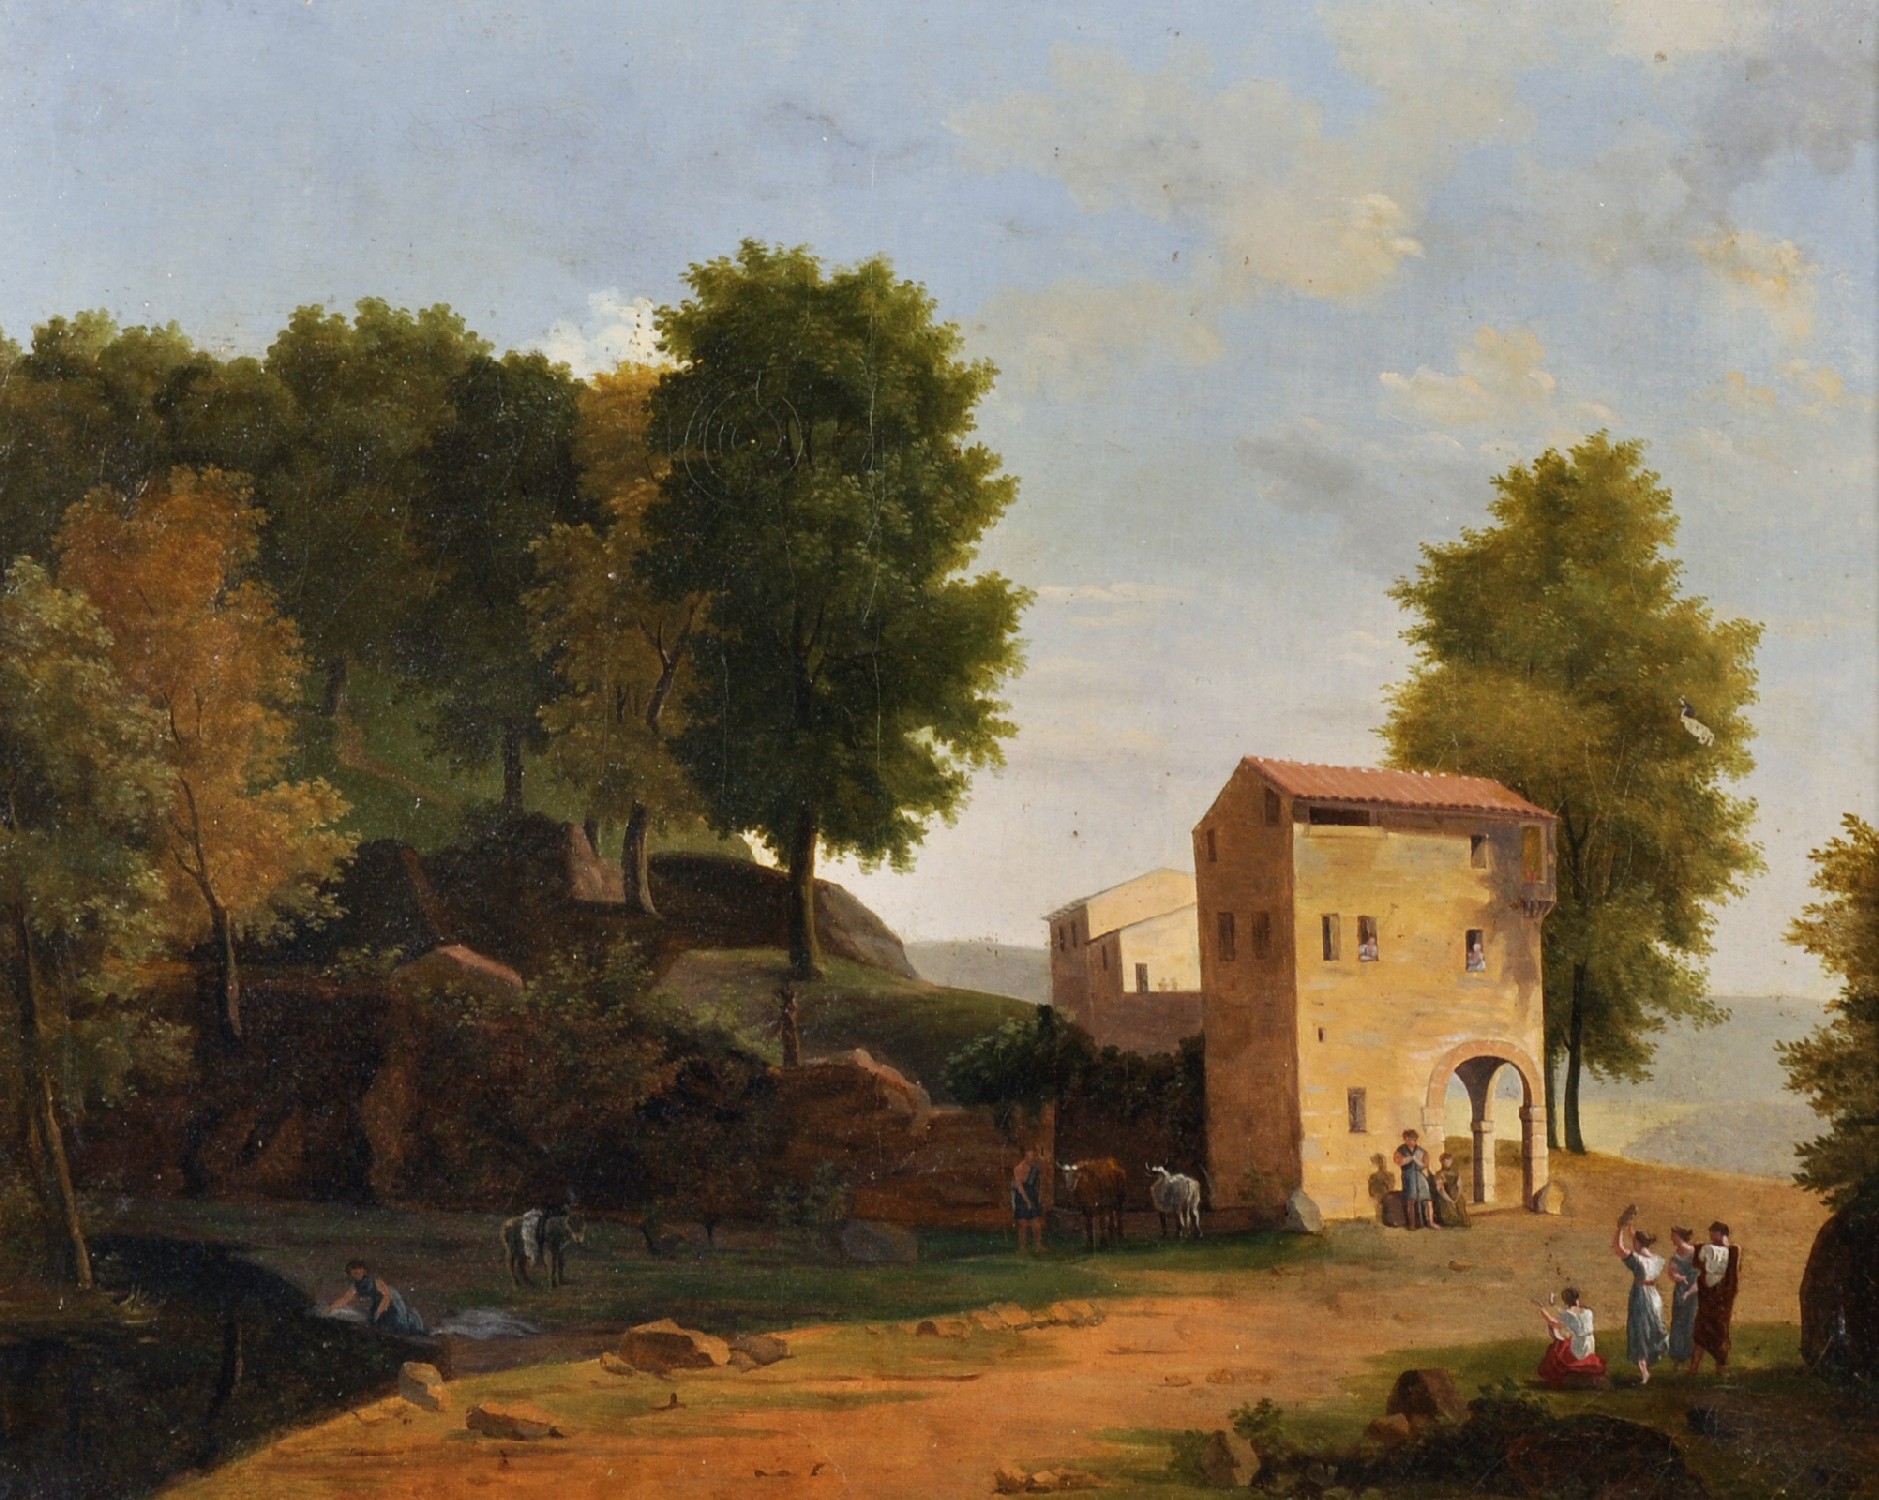 Early 19th Century French School. Figures Playing Musical Instruments in a Landscape, beside a